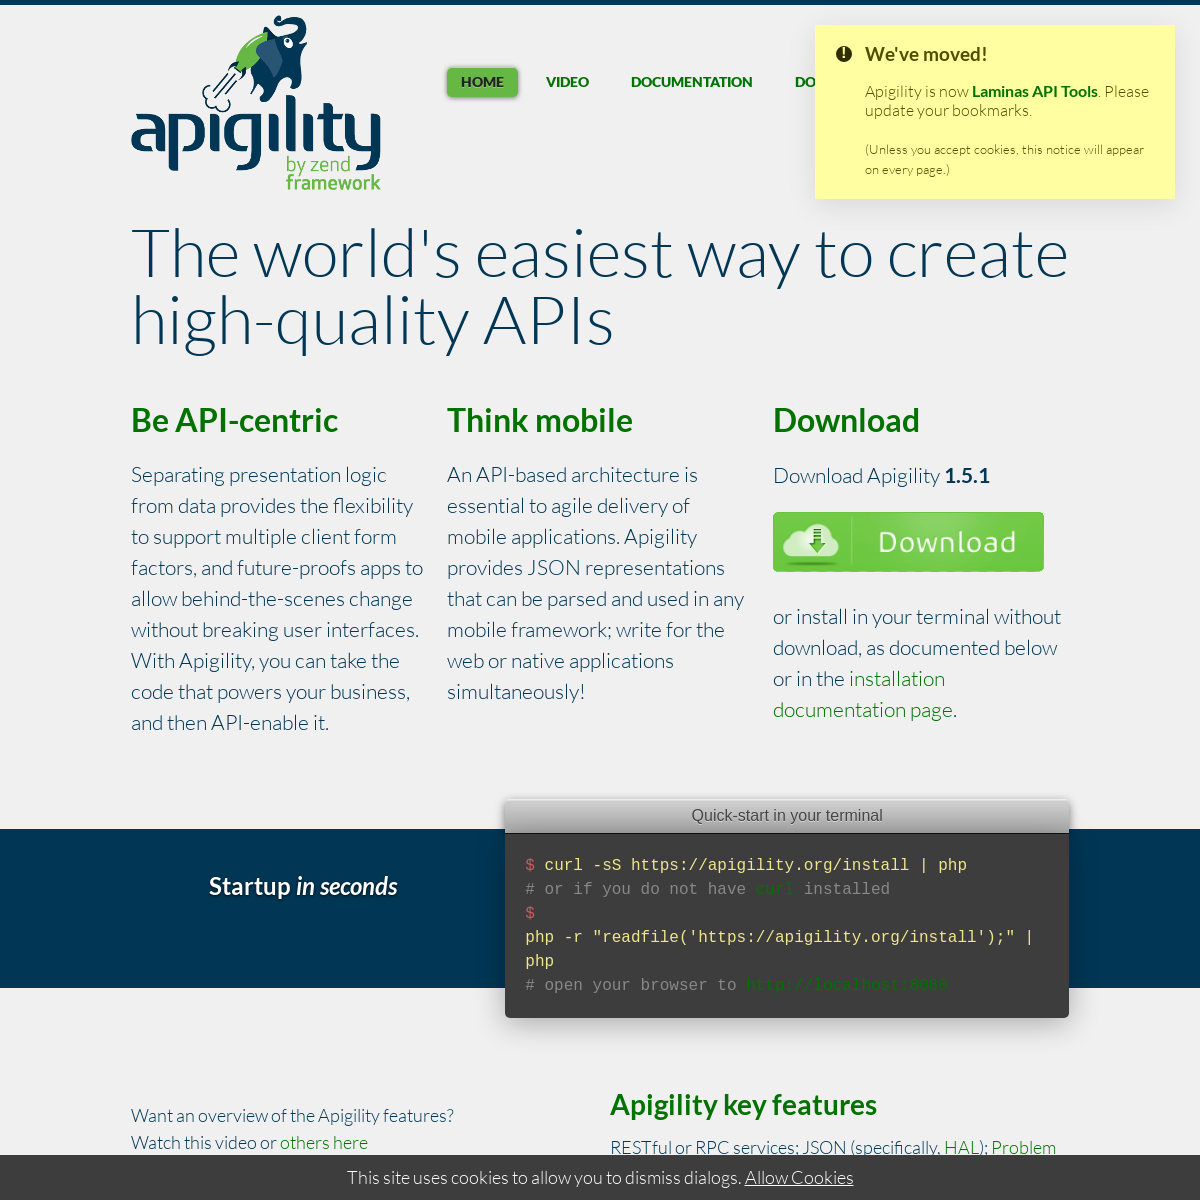 A complete backup of apigility.org